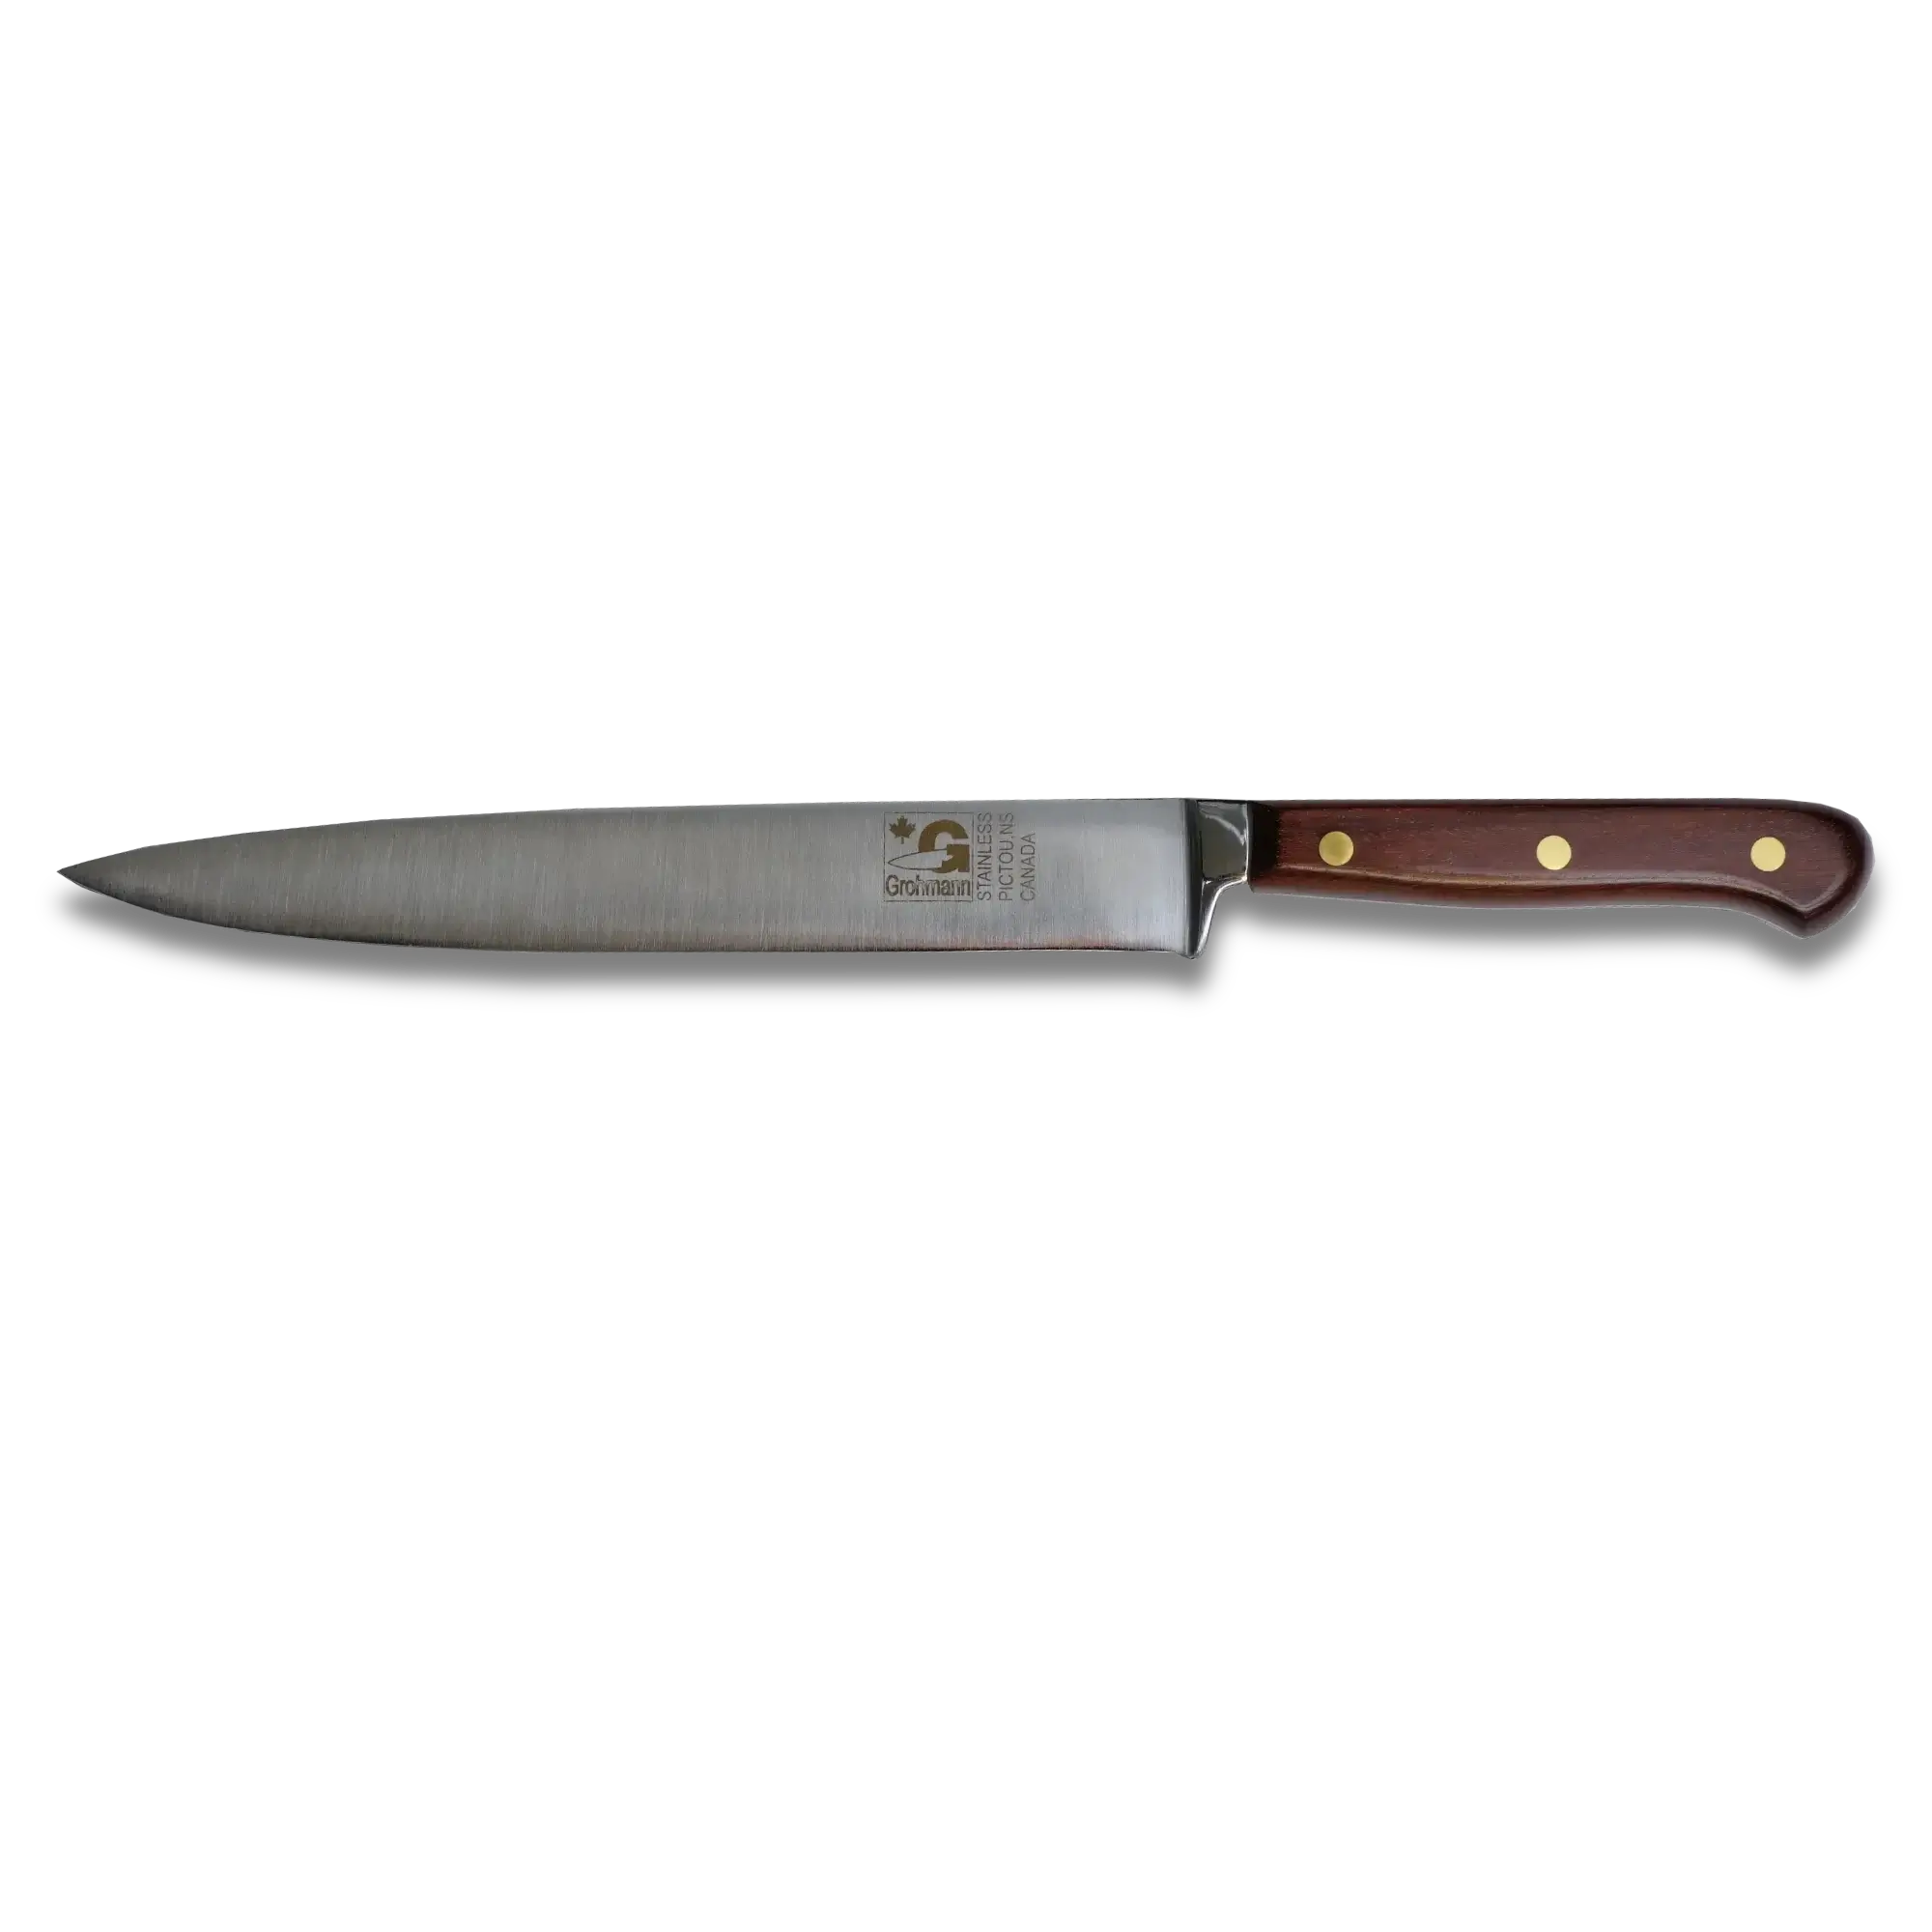 Grohmann - Carving Knife 8" Forged Heavy - #213FG-8